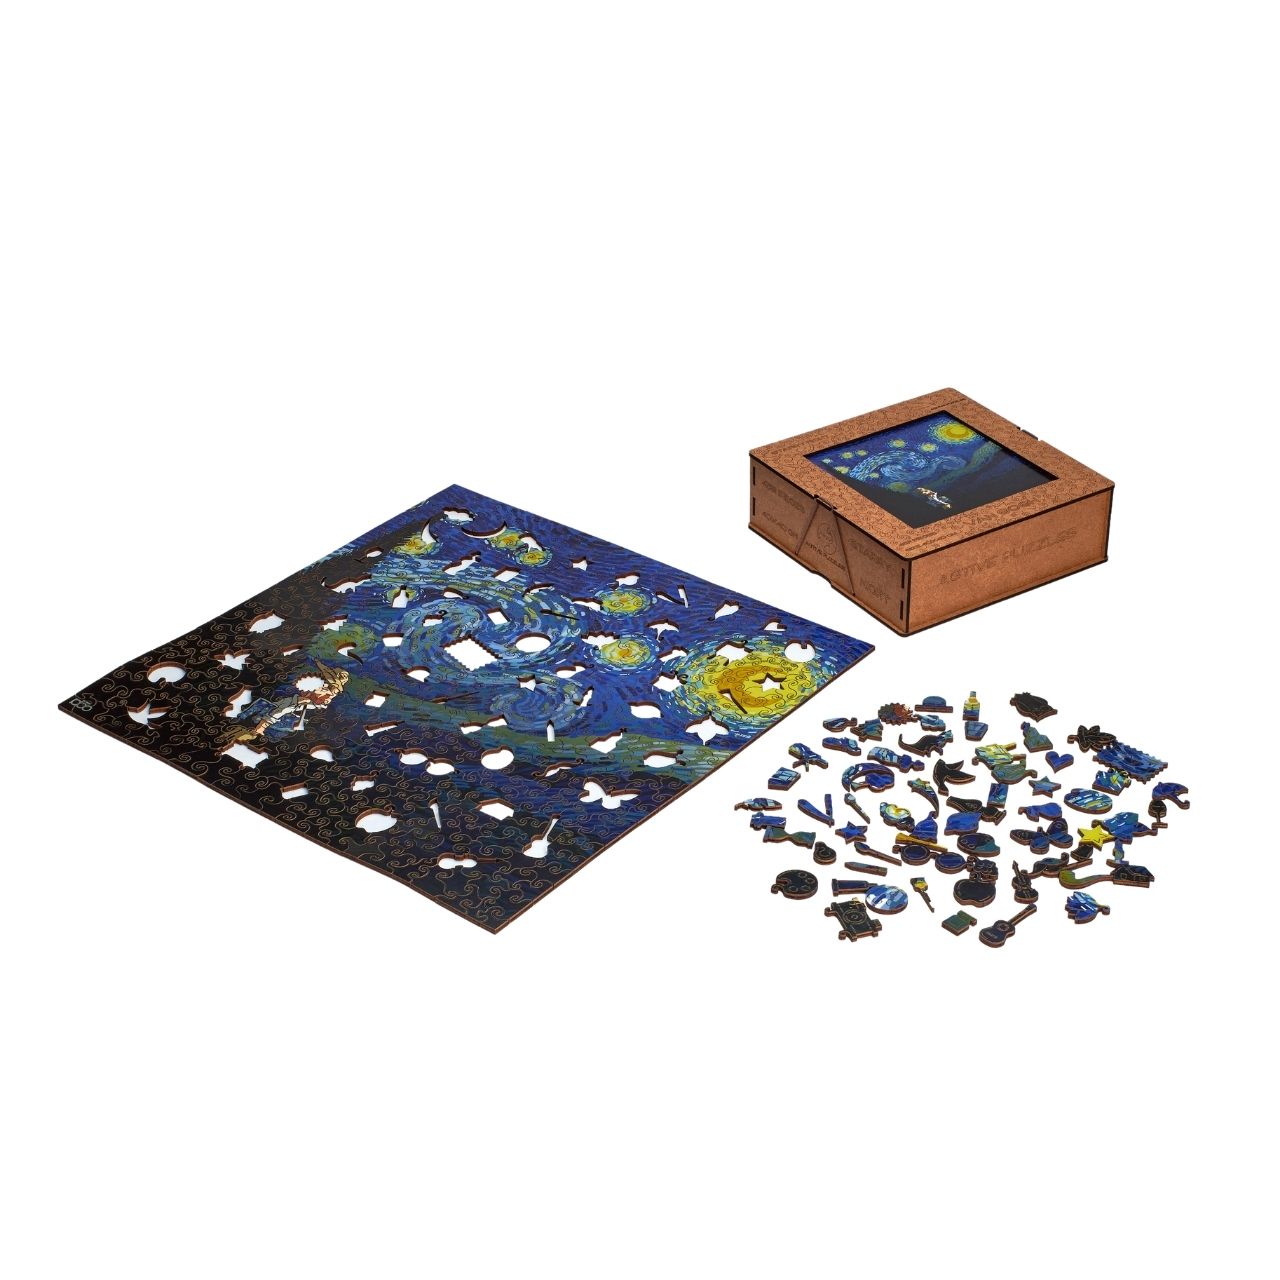 Box And Vangogh Wooden Puzzles